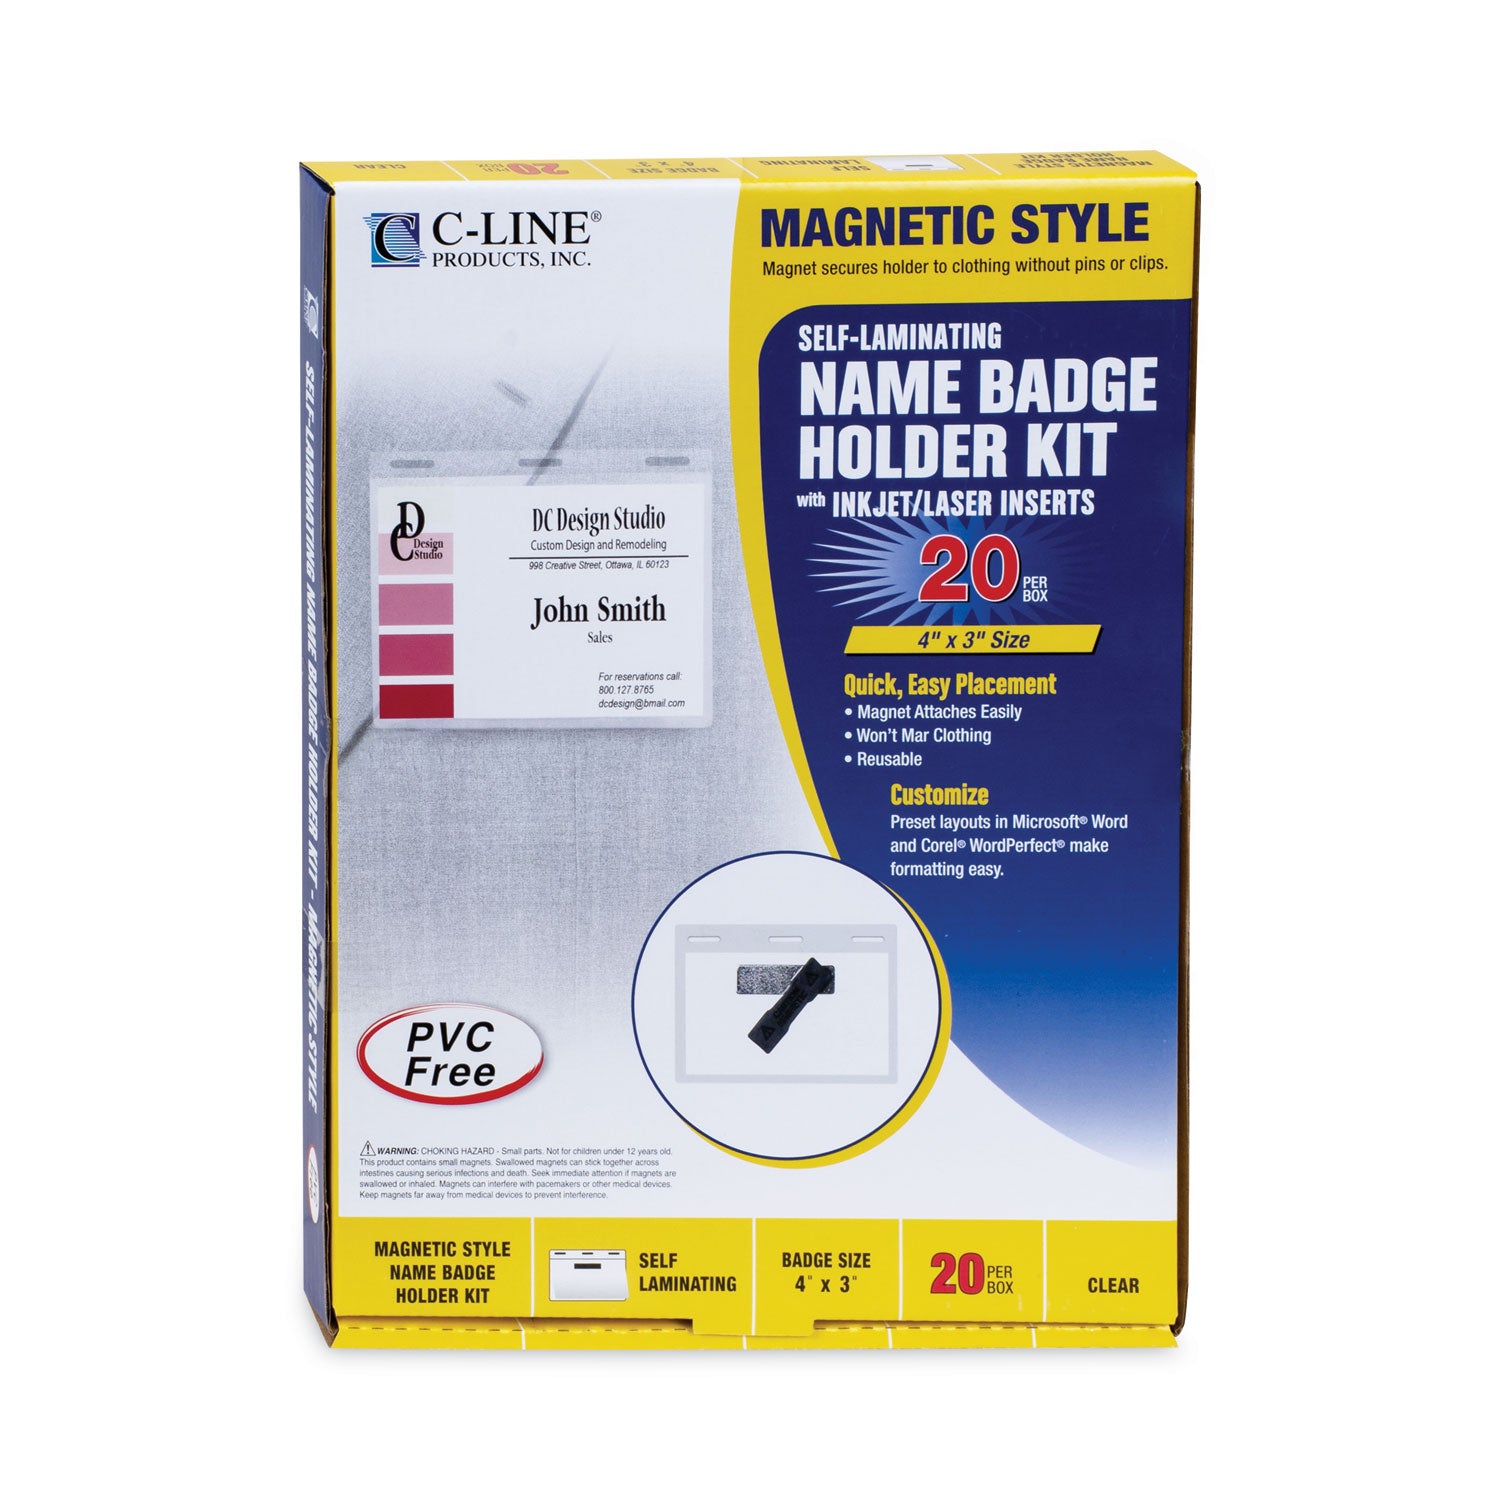 self-laminating-magnetic-style-name-badge-holder-kit-3-x-4-clear-20-box_cli92843 - 5